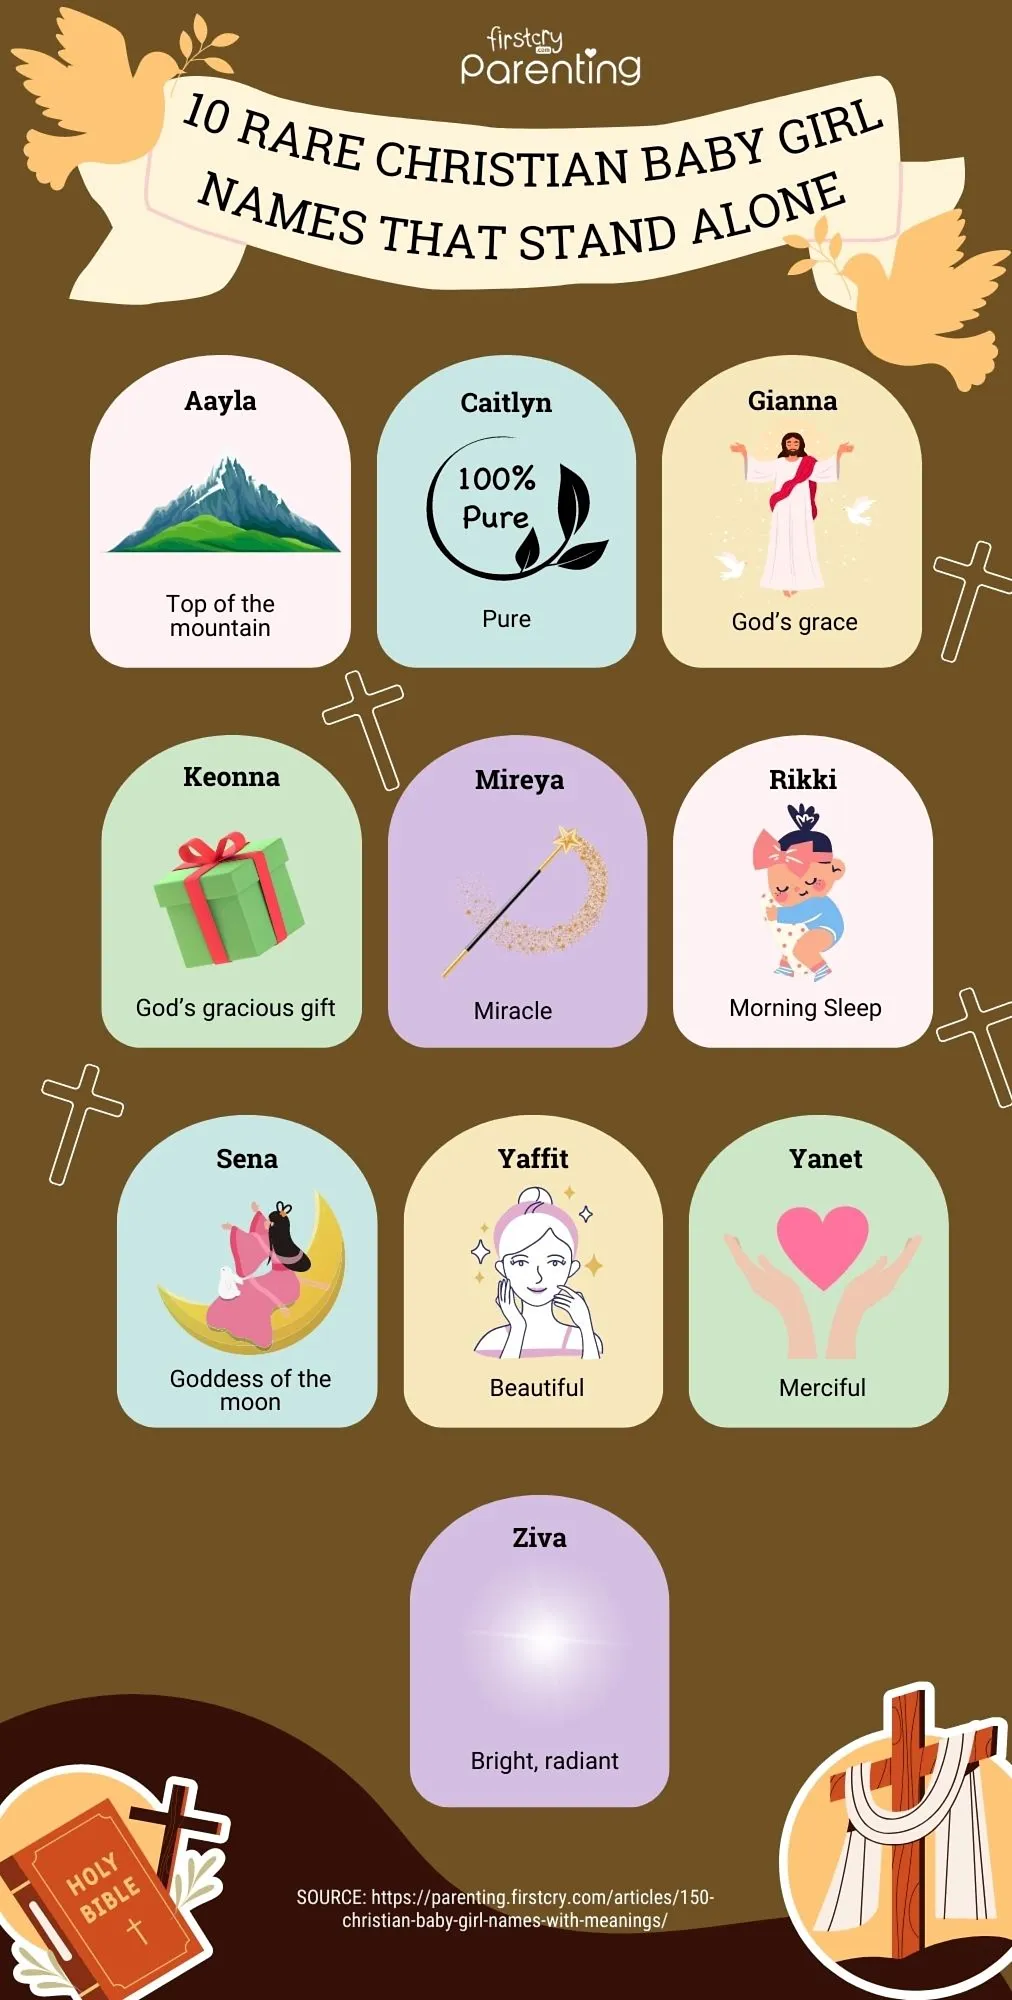 Rare Christian Baby Girl Names That Stand Alone - Infographic